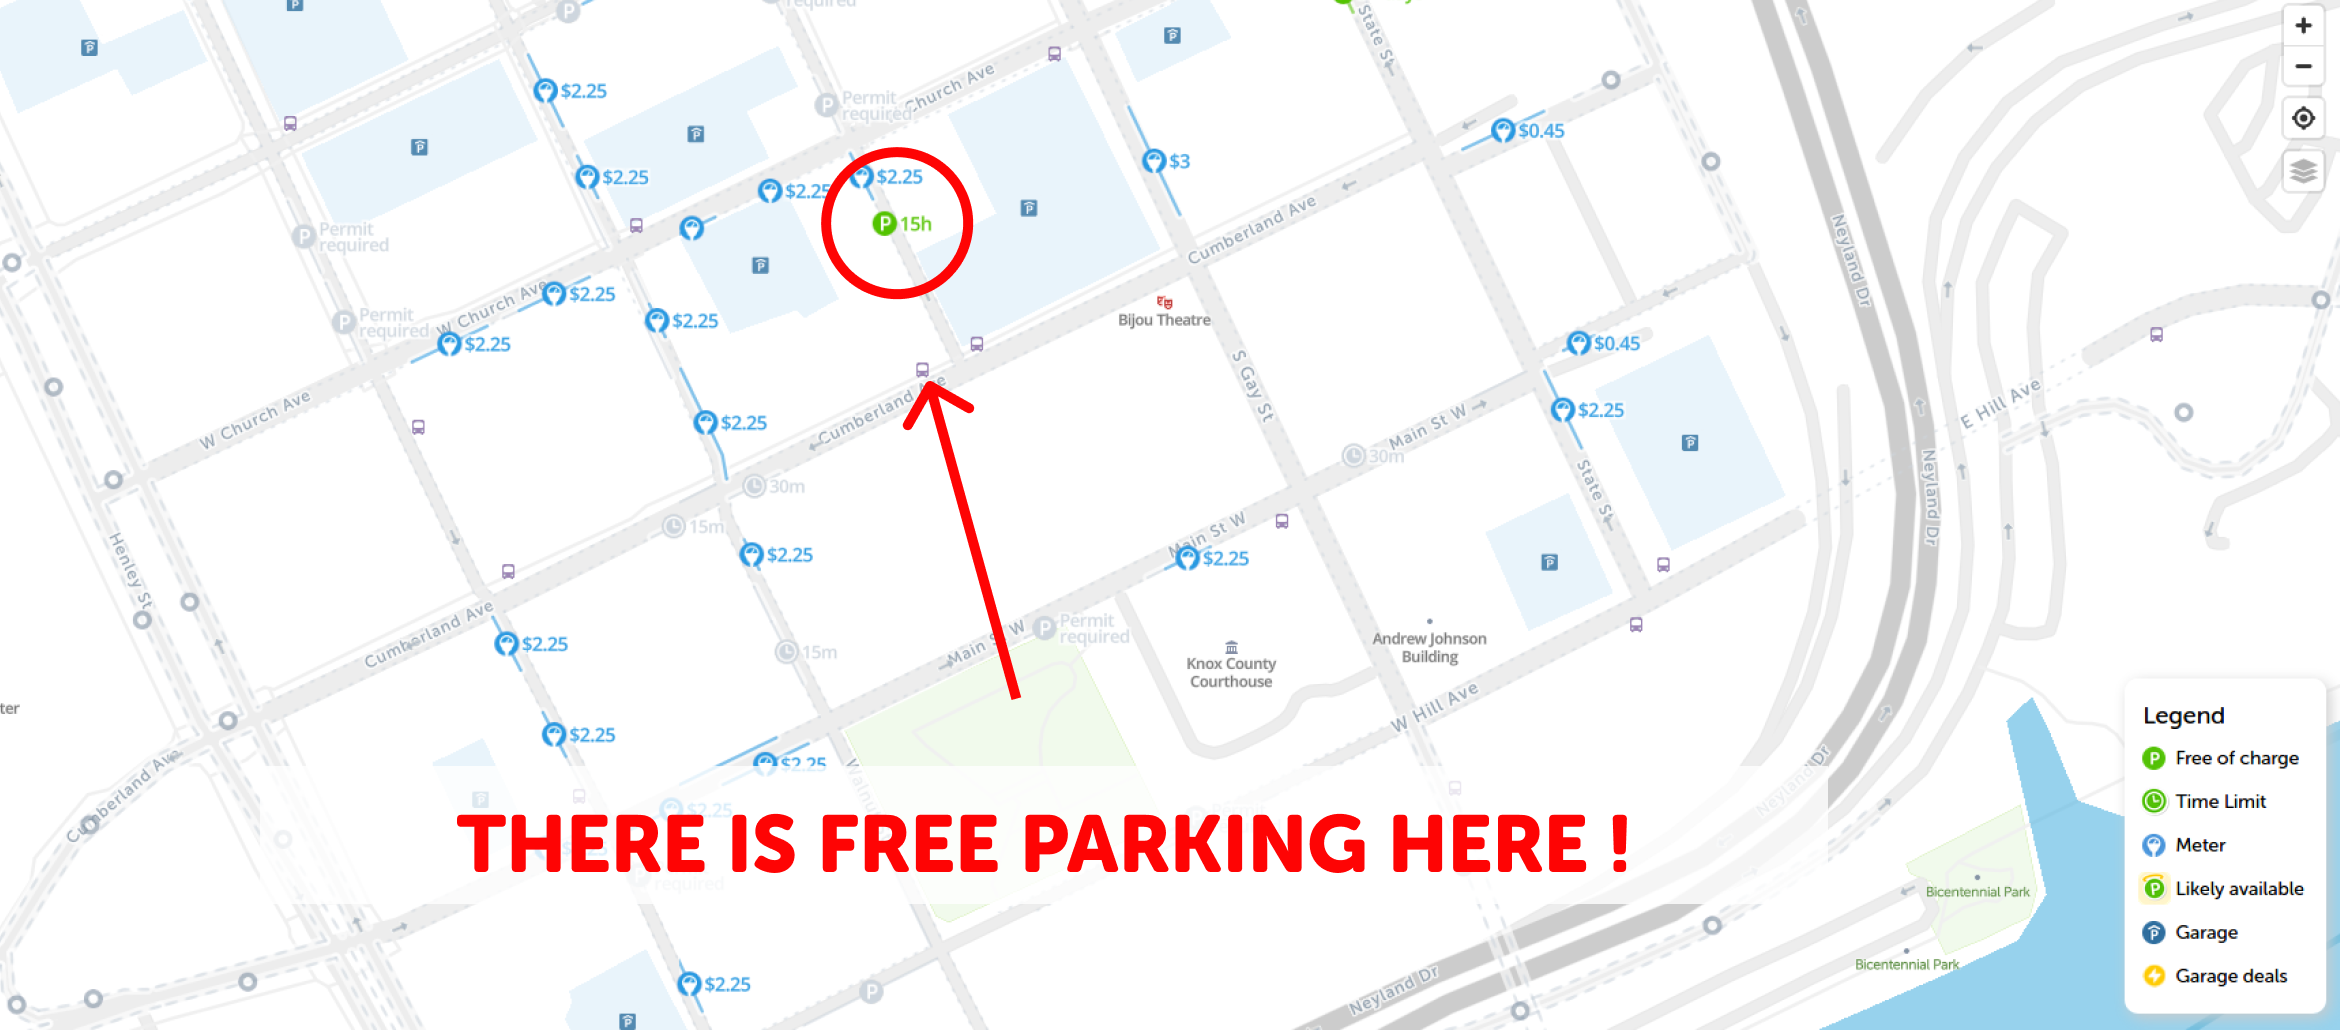 map of free parking in Knoxville - SpotAngels